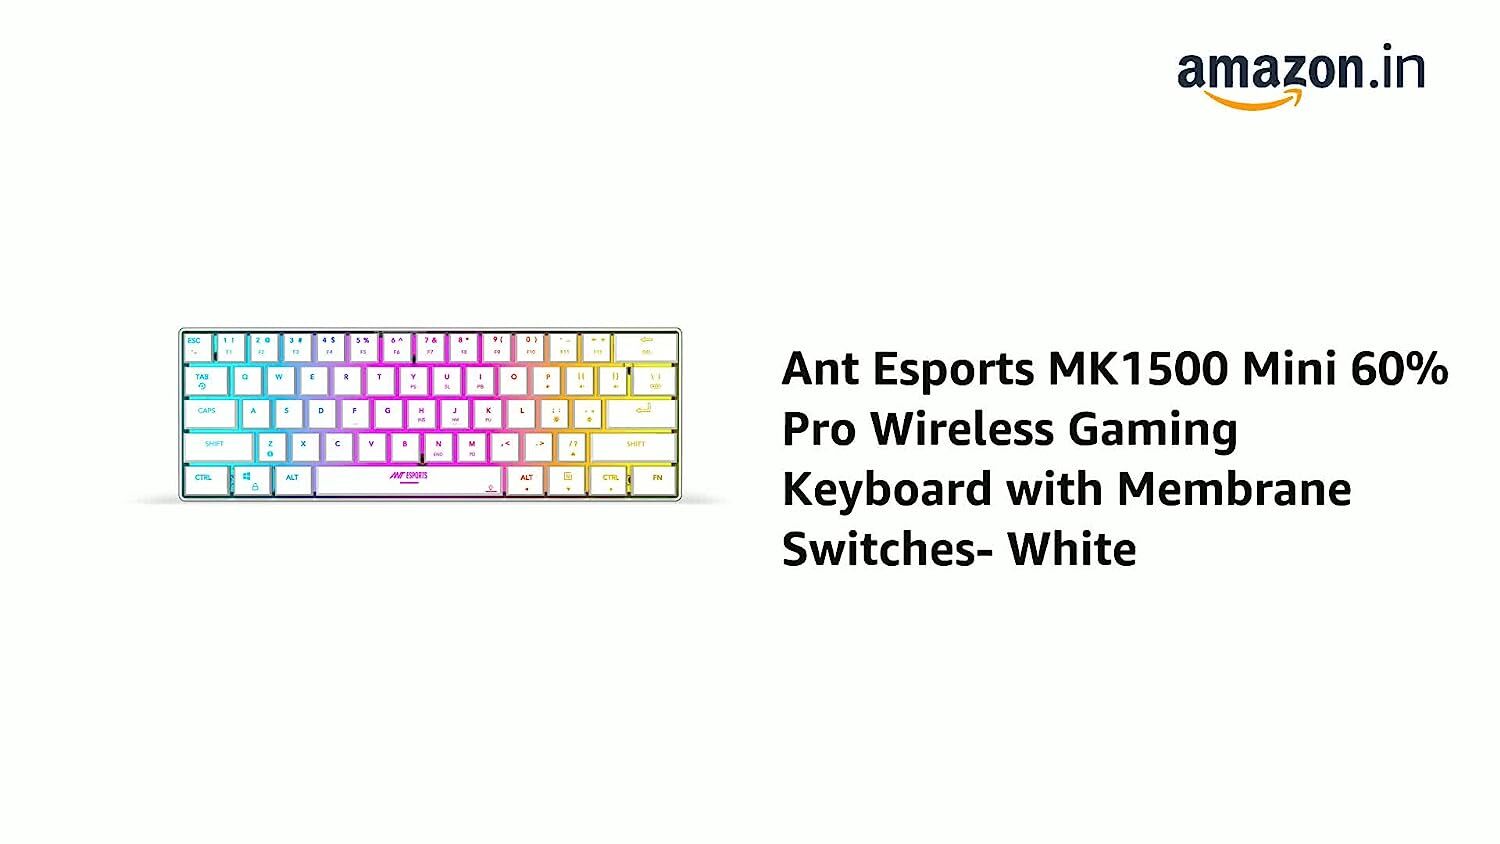 Ant Esports MK1500 Mini 60% Pro RGB  Wireless Gaming Keyboard with Membrane Switches for PC / Mobile / Tablets / Laptop / TVs- White